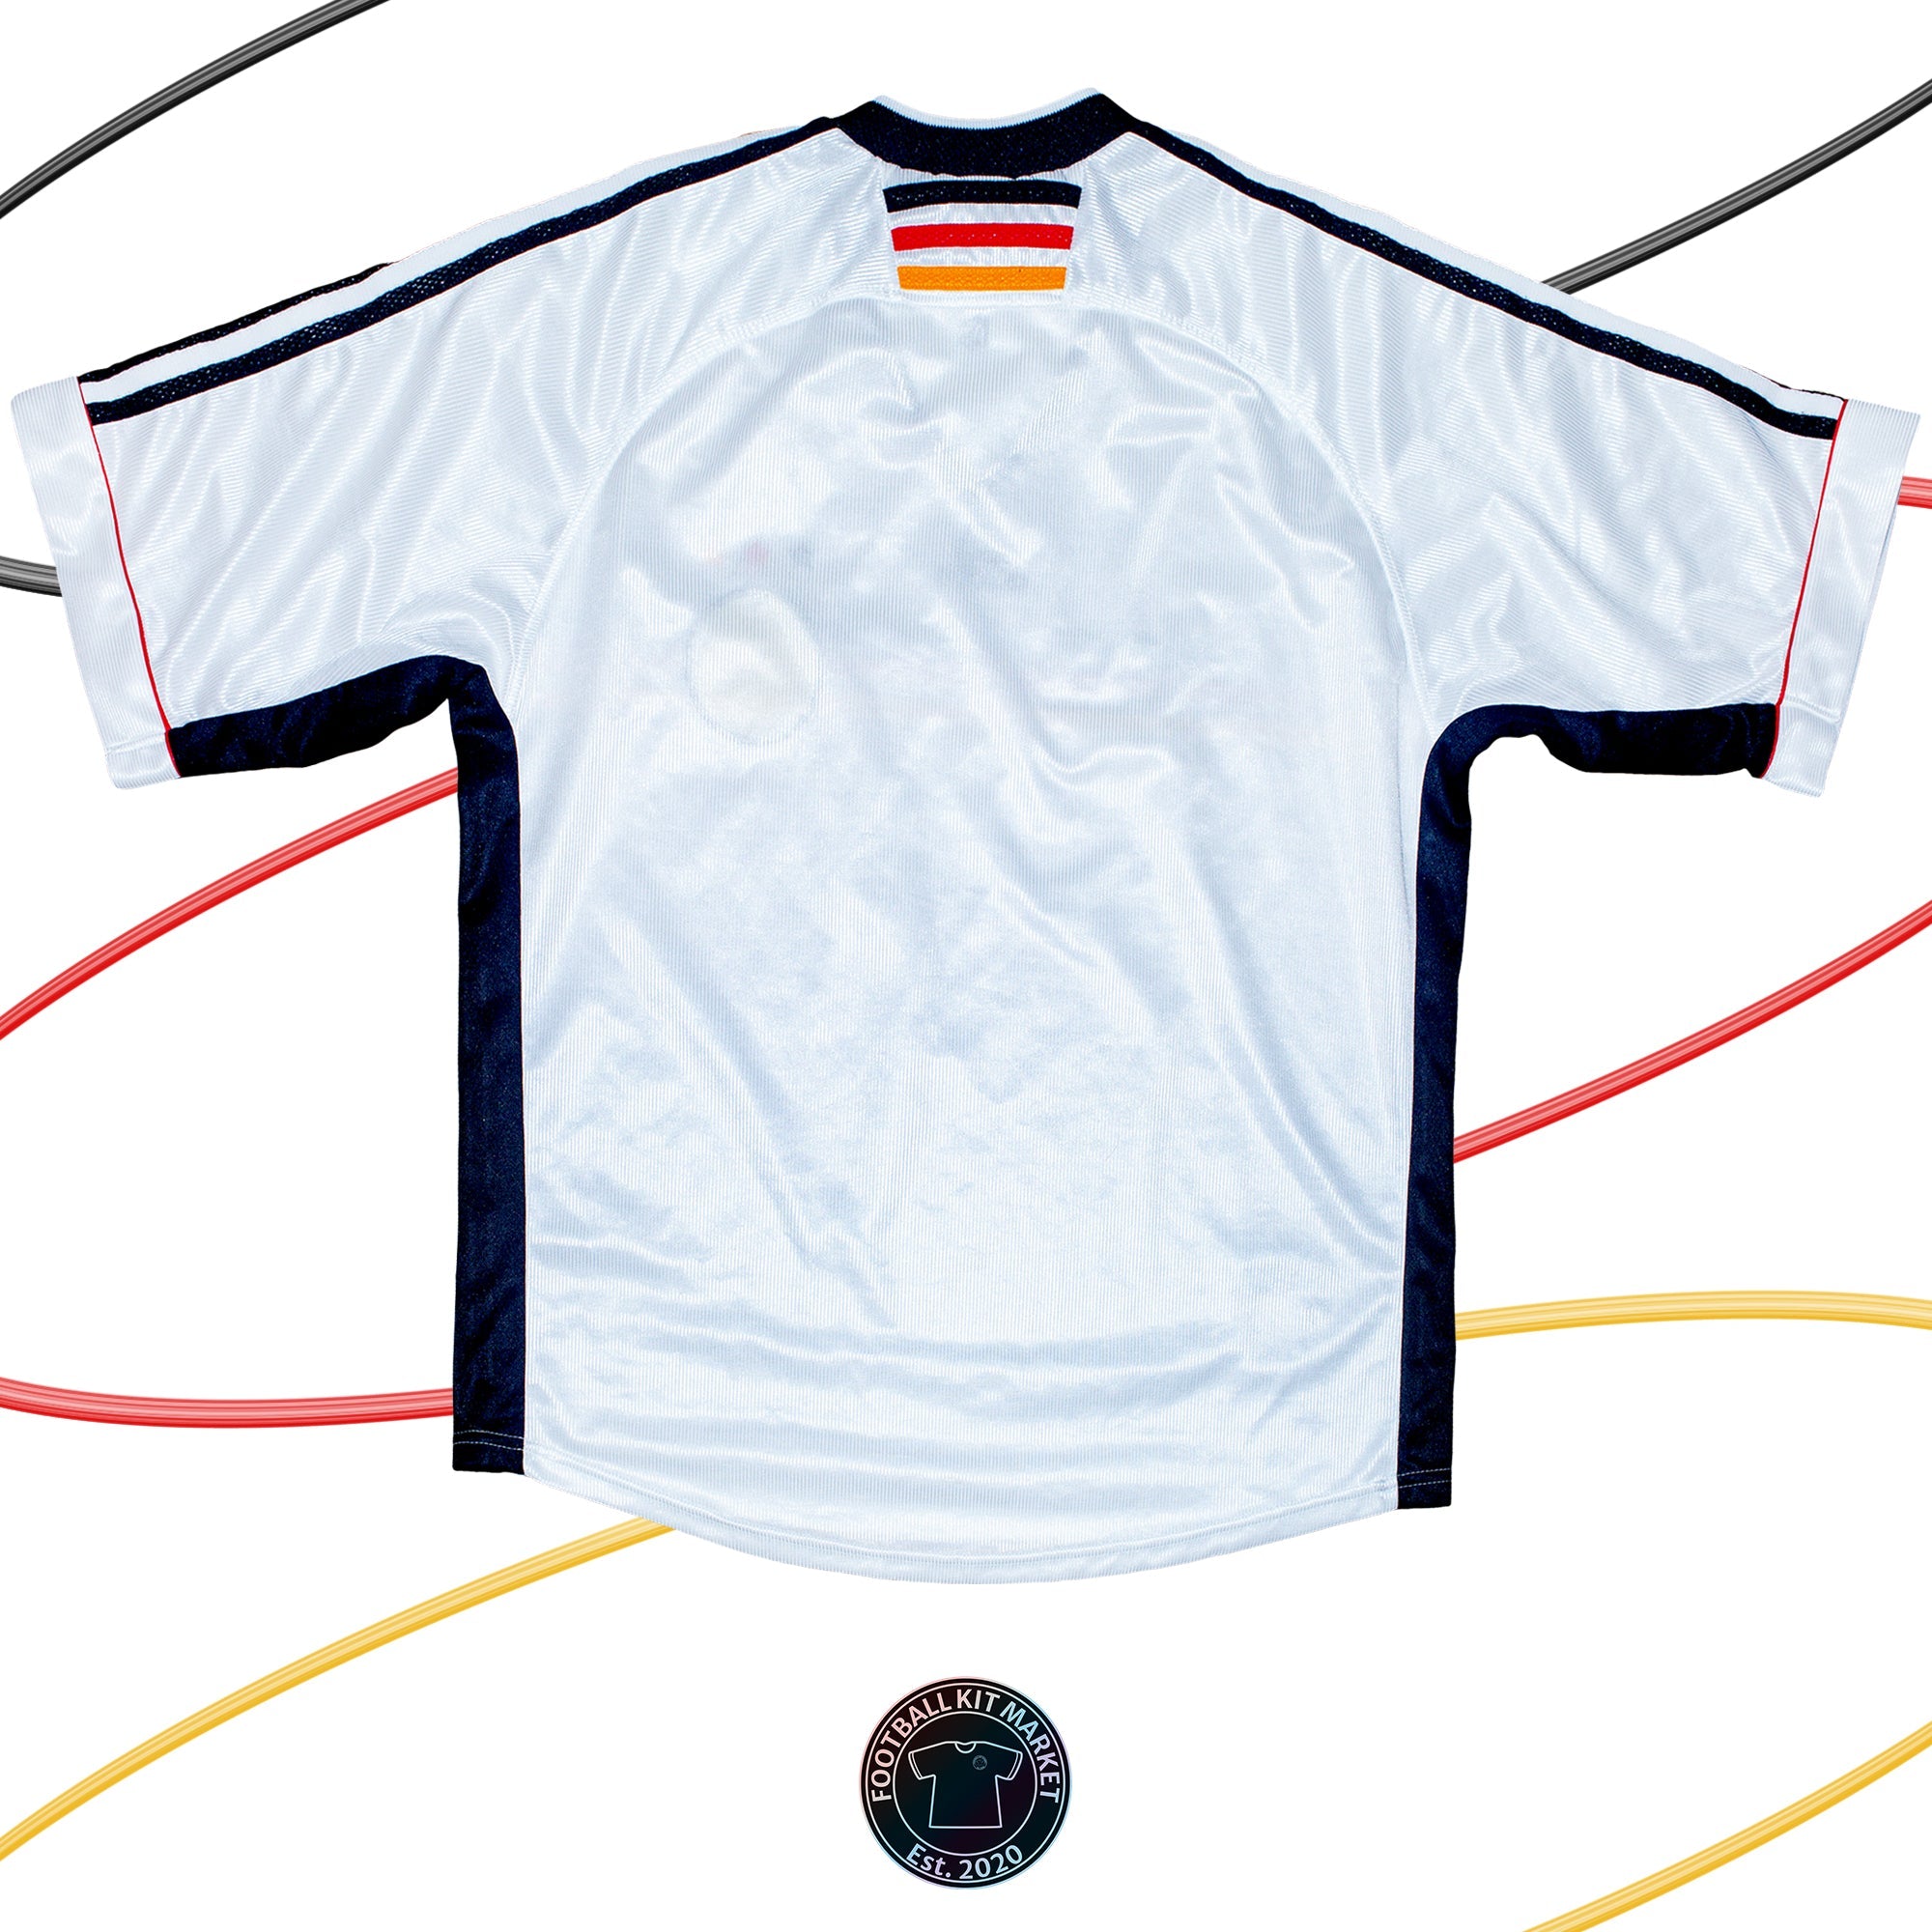 Genuine GERMANY Home (1998-2000) - ADIDAS (XL) - Product Image from Football Kit Market